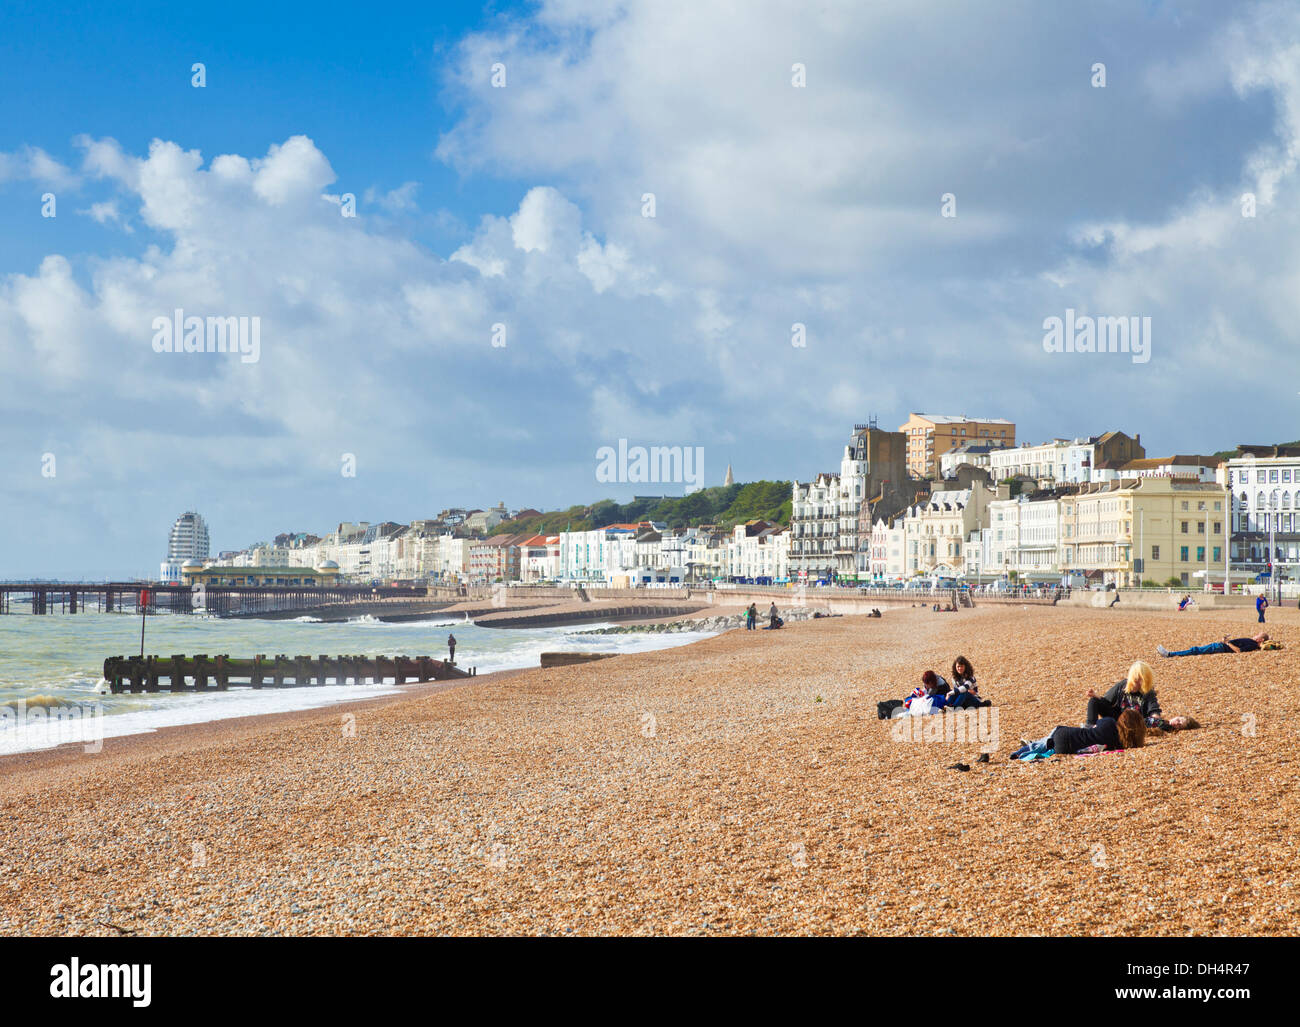 Hastings Beach Hastings East Sussex Inghilterra Regno Unito Europa Foto Stock